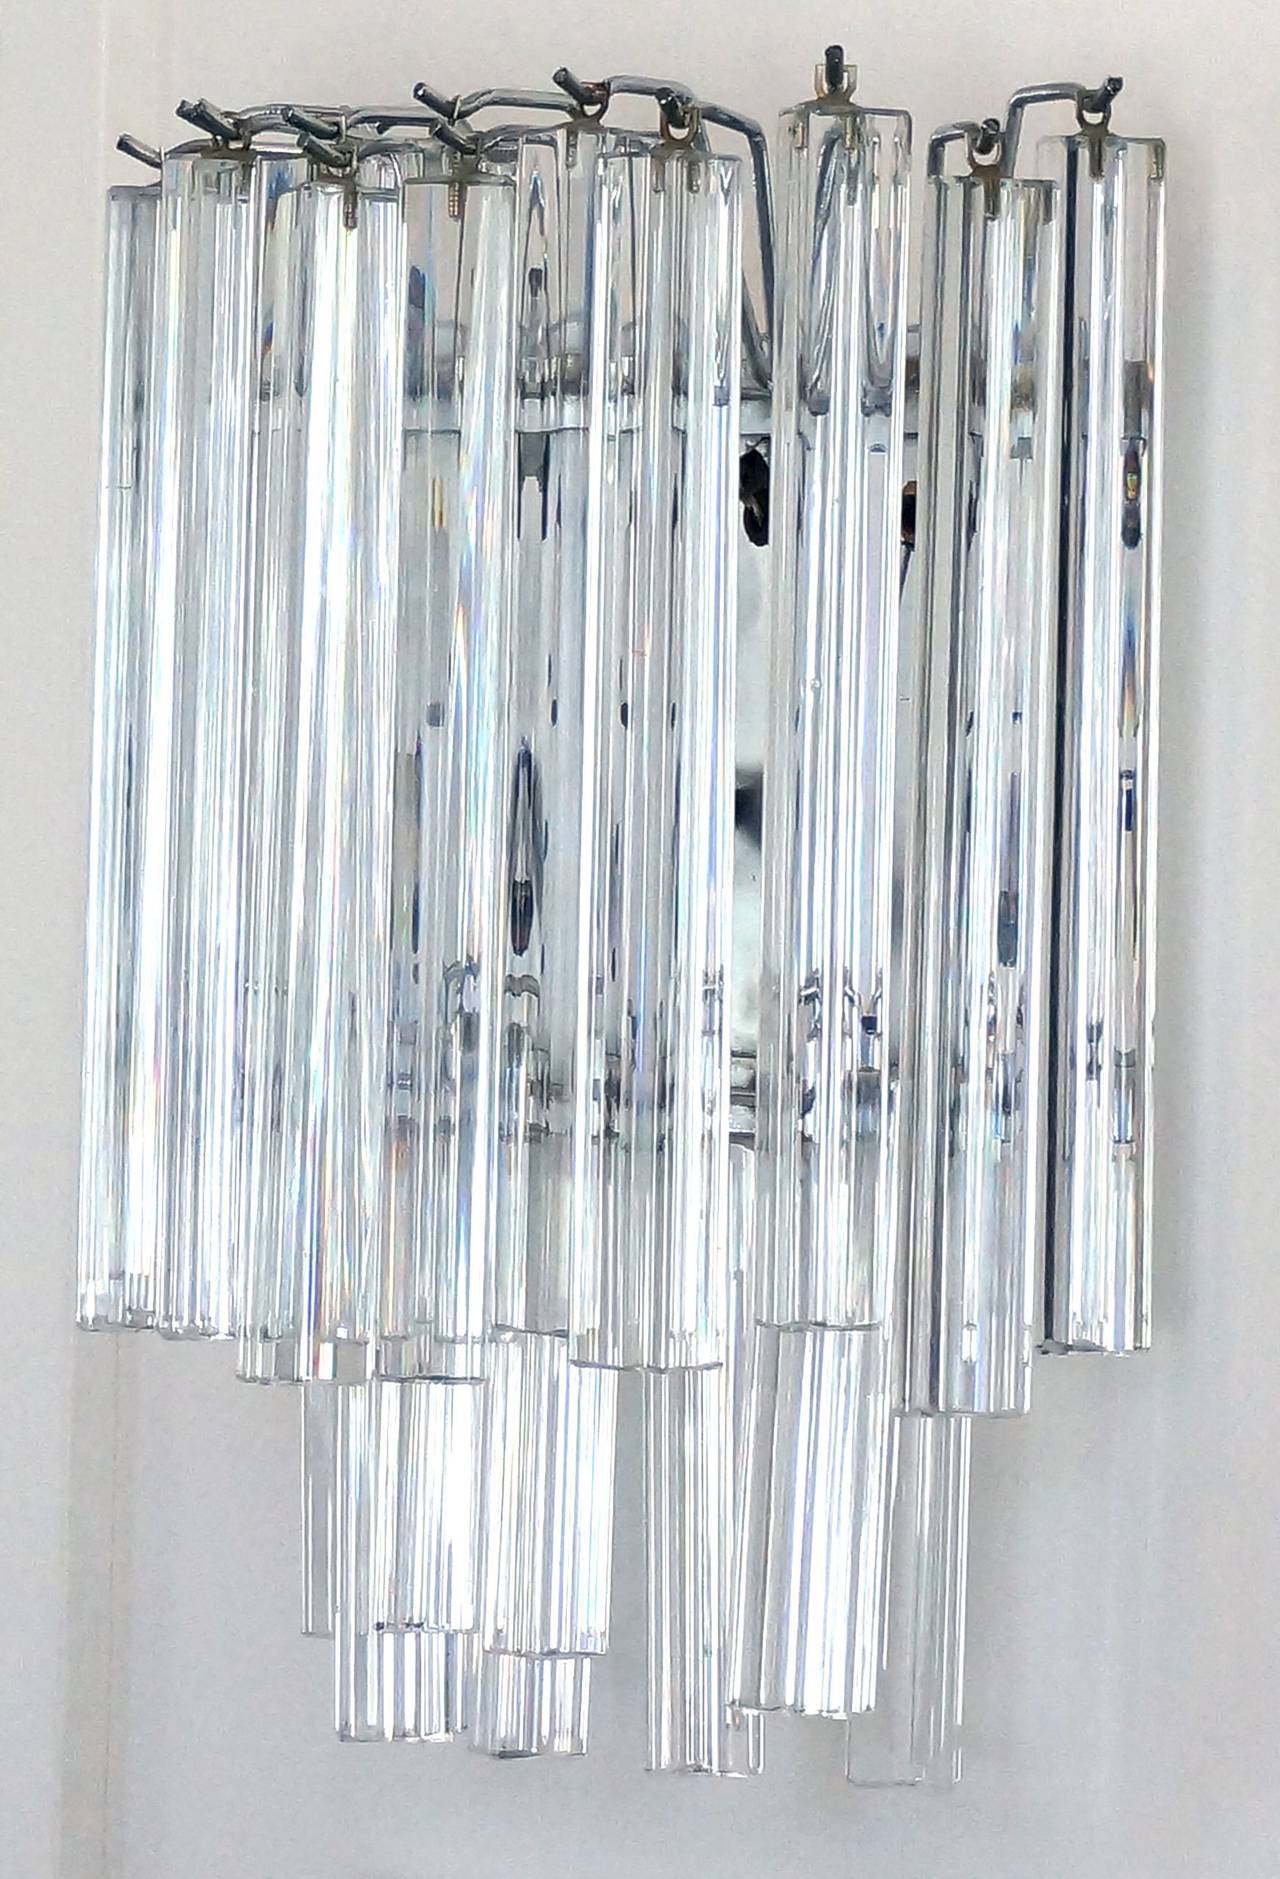 This set of four wall sconces date to the 1960s-1970s, and were produced by Camer Lighting. 

They are composed of two-tiers of three-sided colorless Venini Murano glass prisms. The upper tier prisms are 11